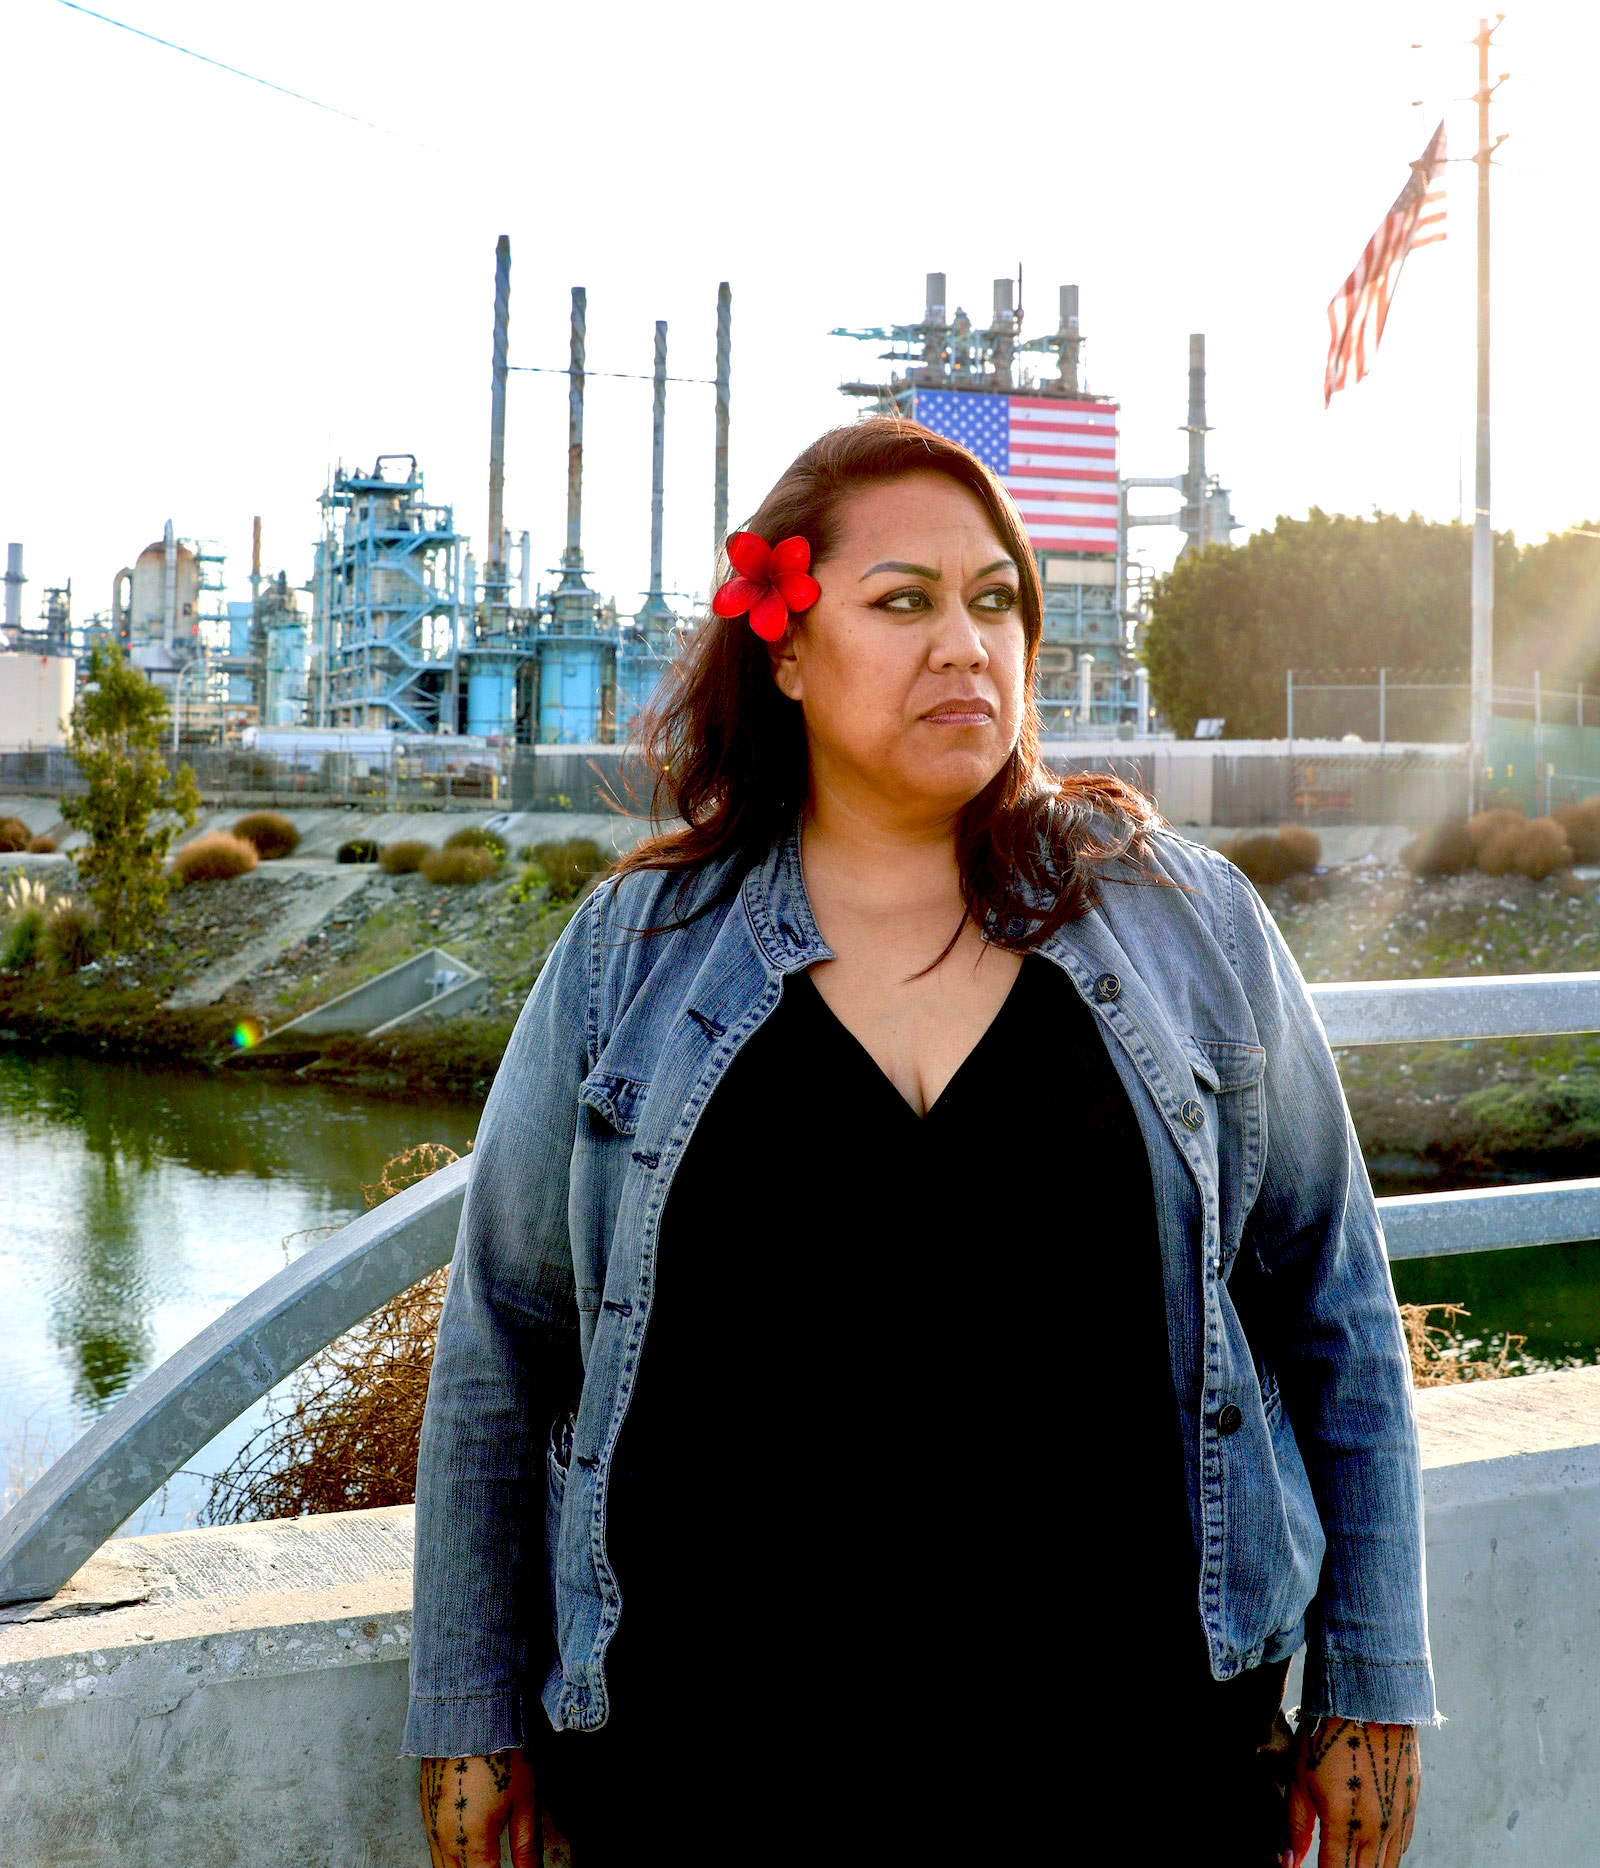 Ana Meni stands in front of the Marathon Refinery on the banks of the Dominguez Channel in Carson, California.